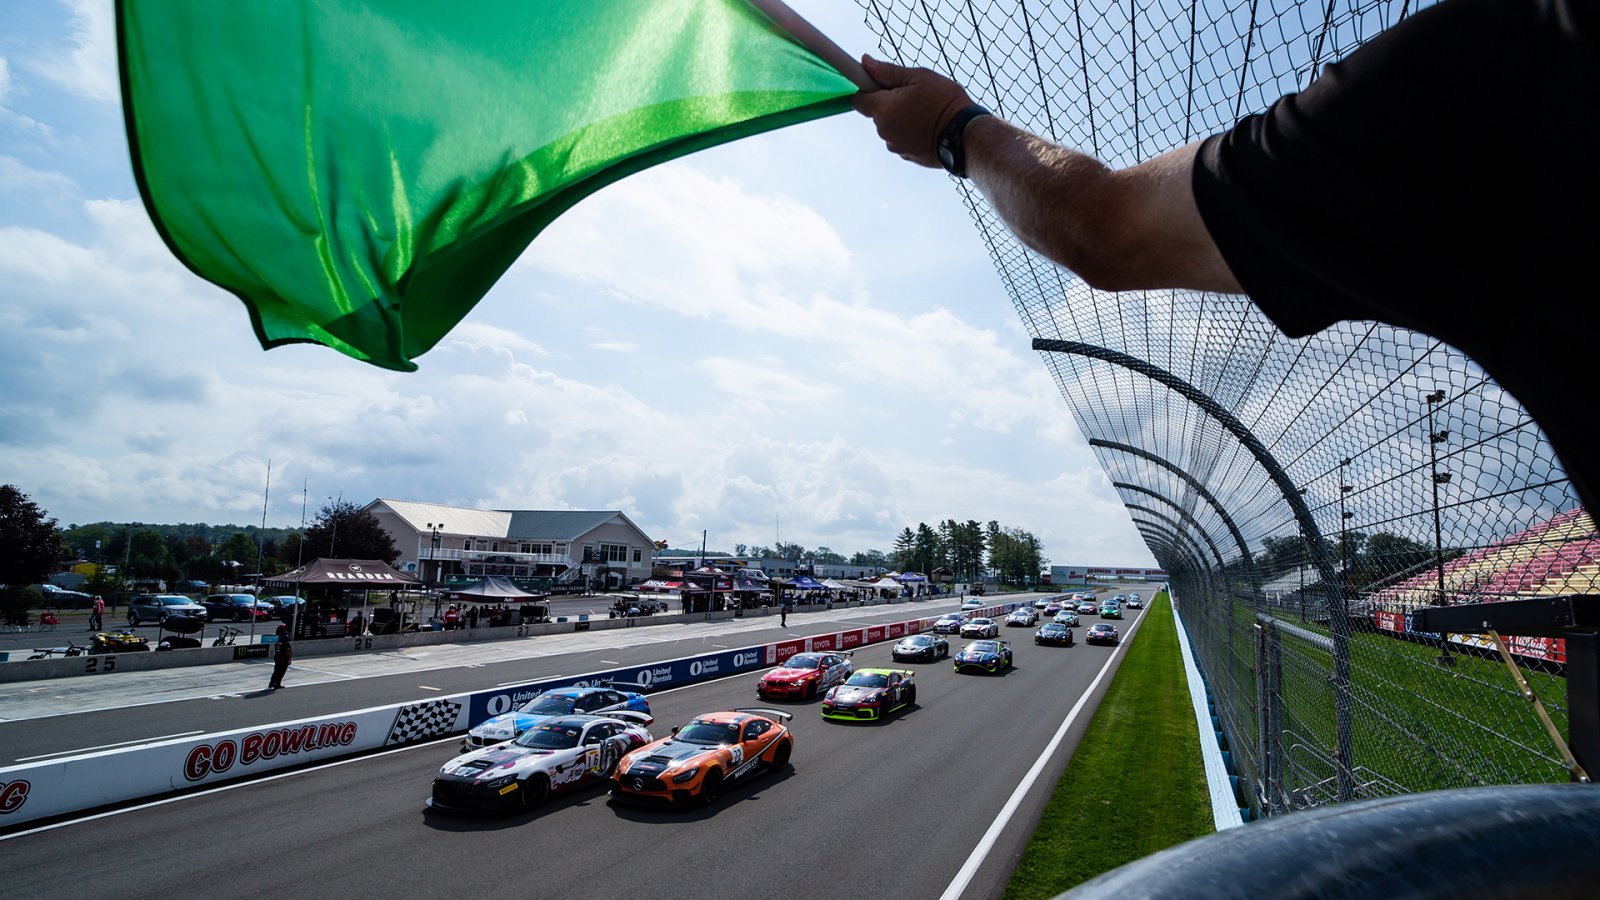 Last Lap Pass Leads to Victory for Capizzi, Capestro-Dubets